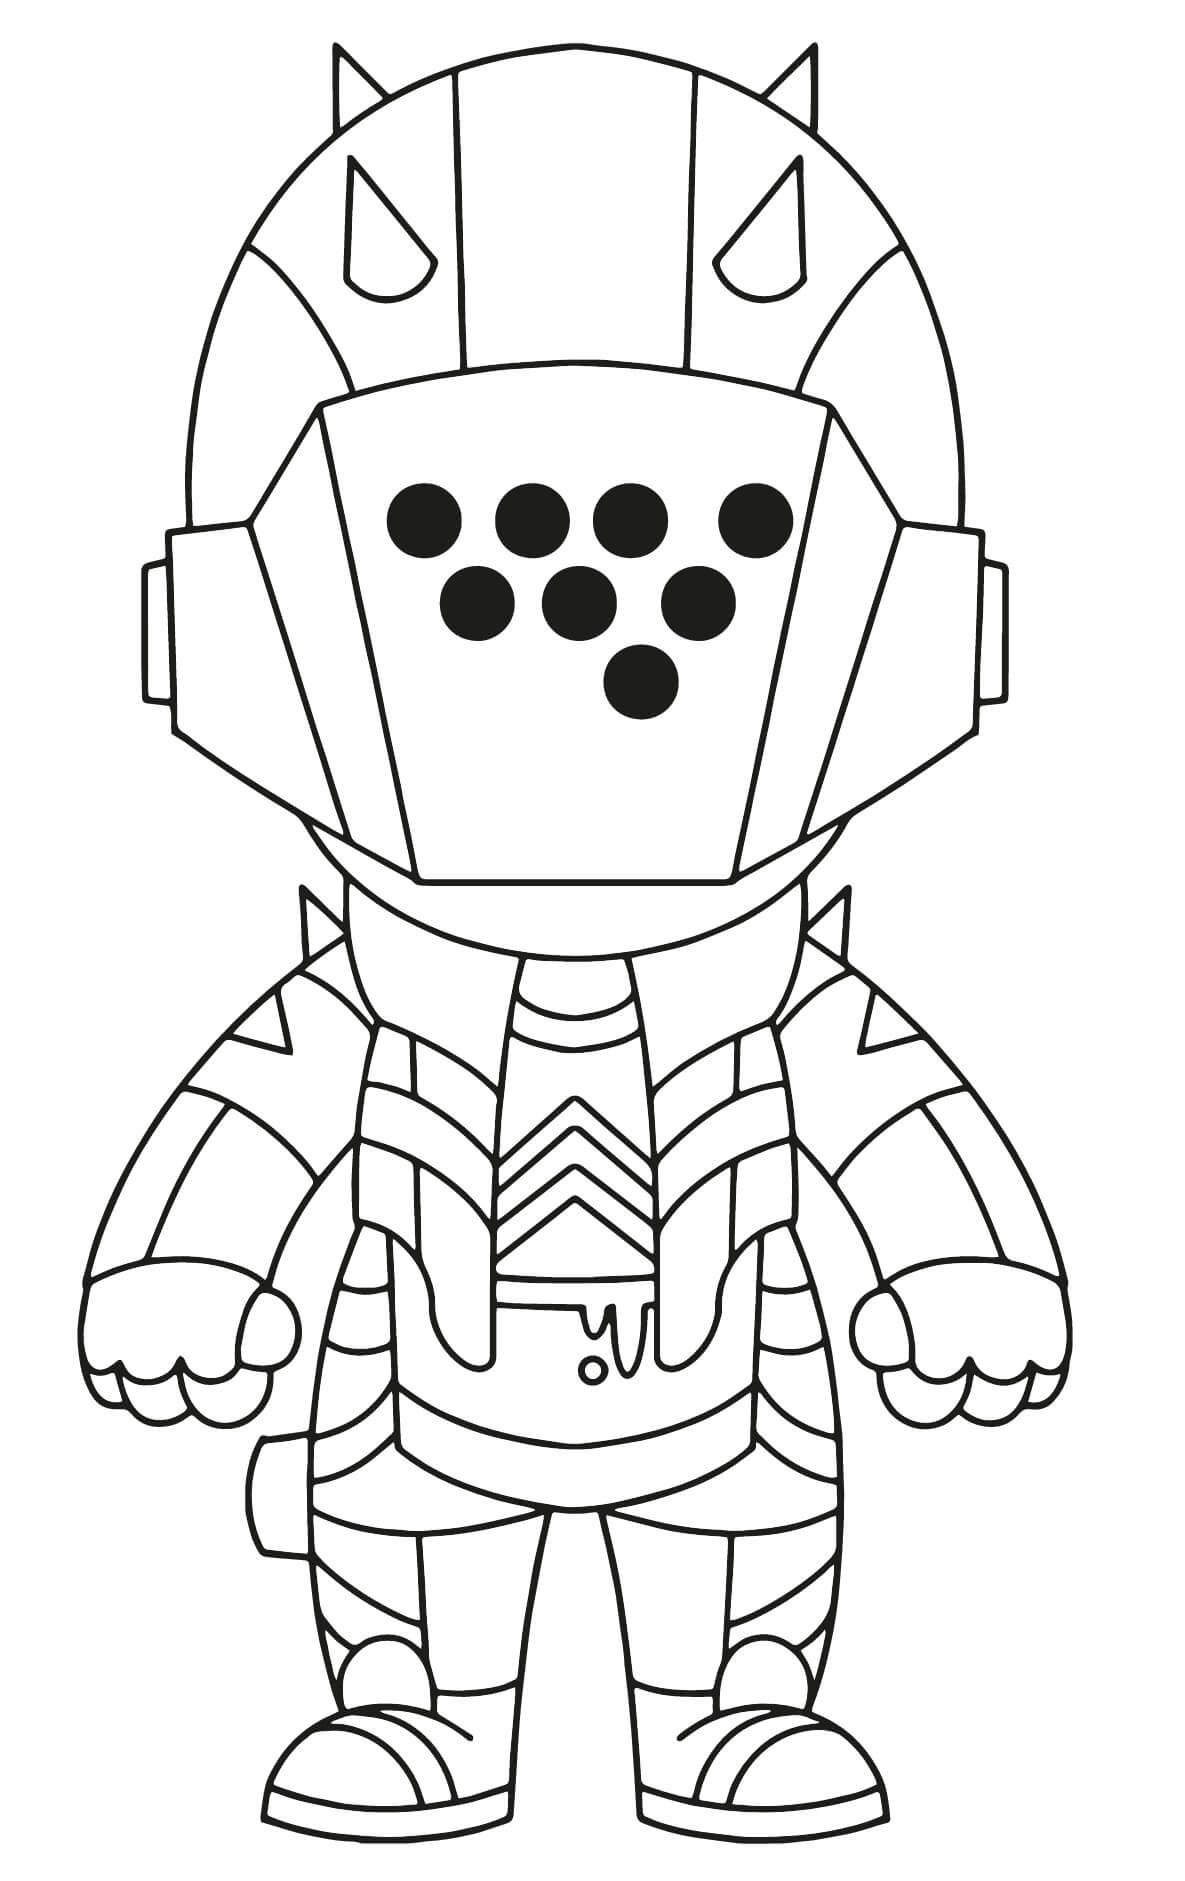 Maitre Occulte Coloring Page